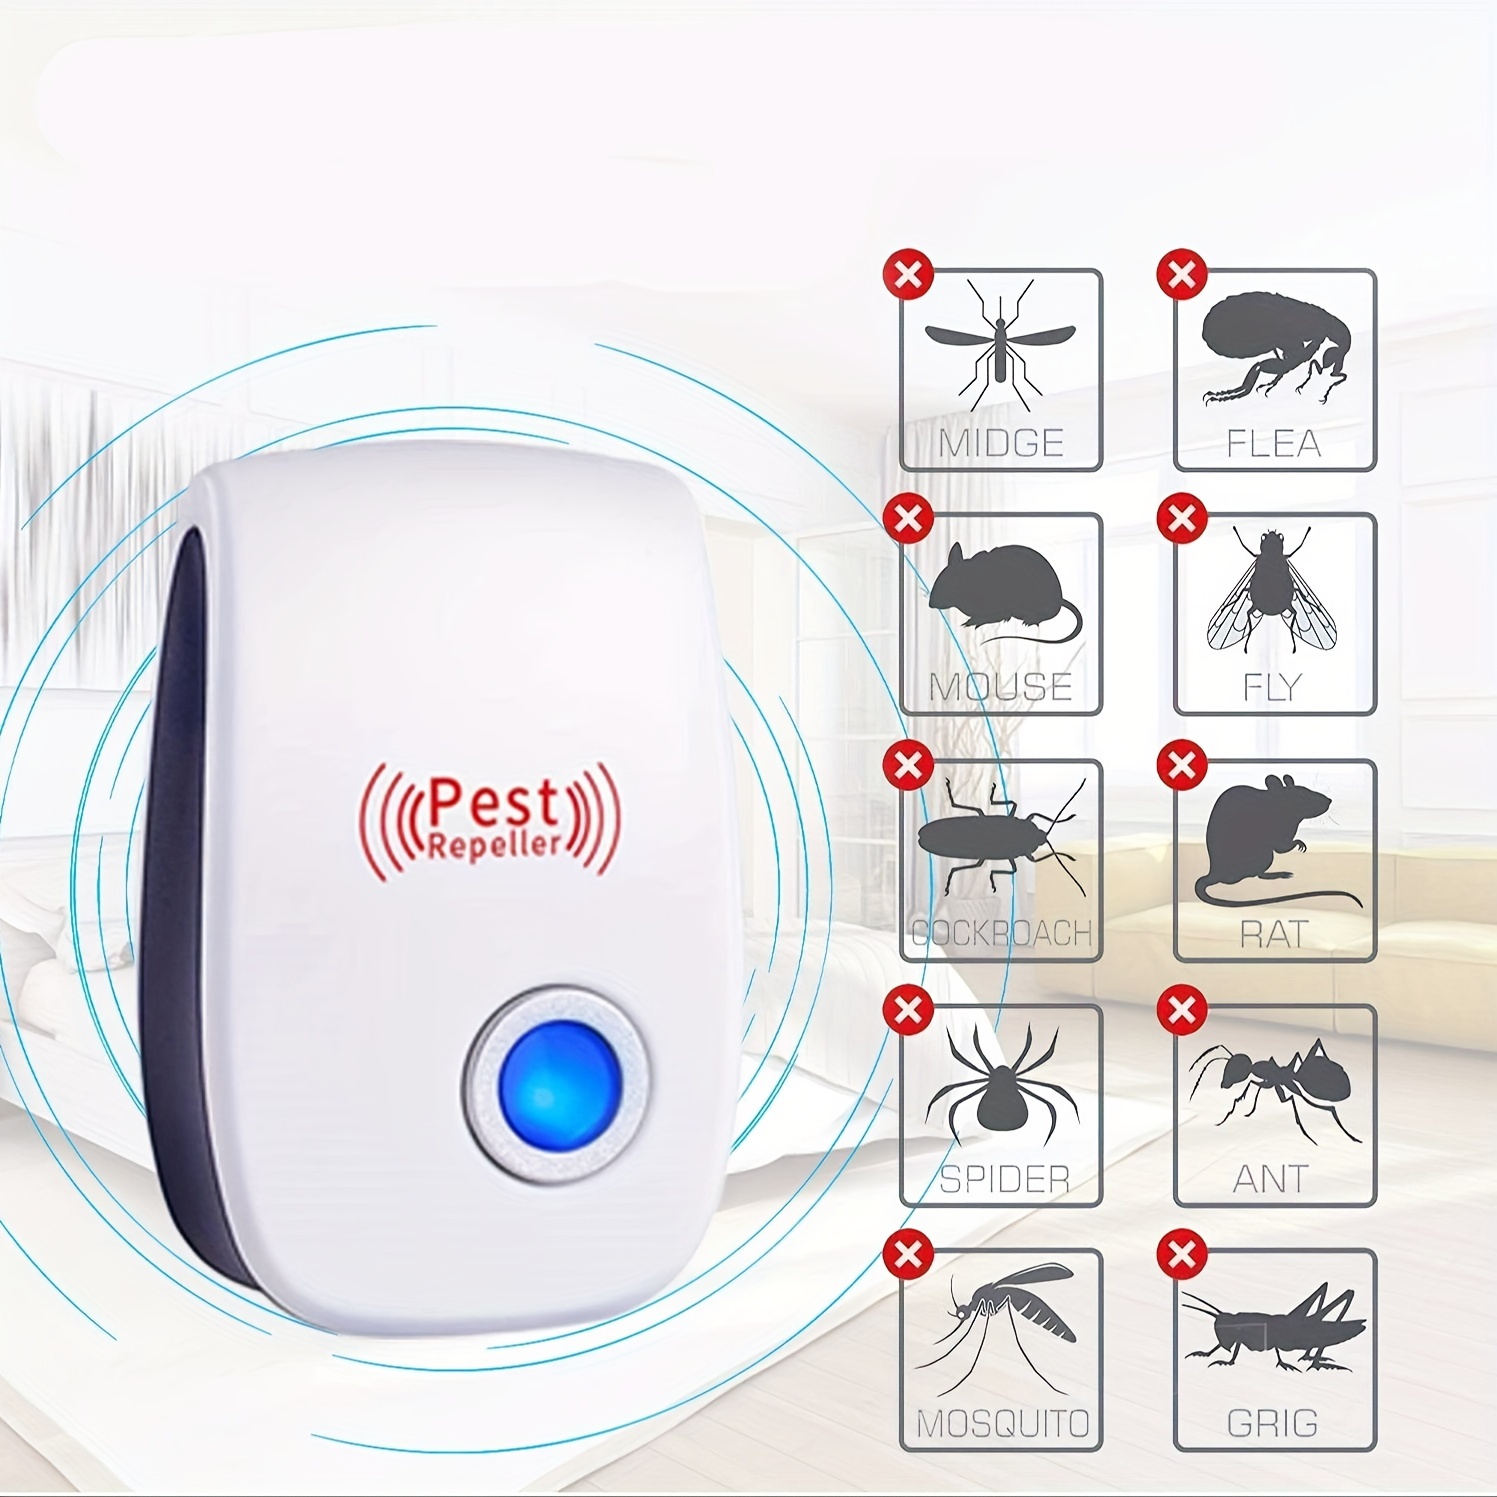 Ultrasonic Pest Insect Rodent Repeller Electronic Plug-In Mice Rat  Cockroach Bug